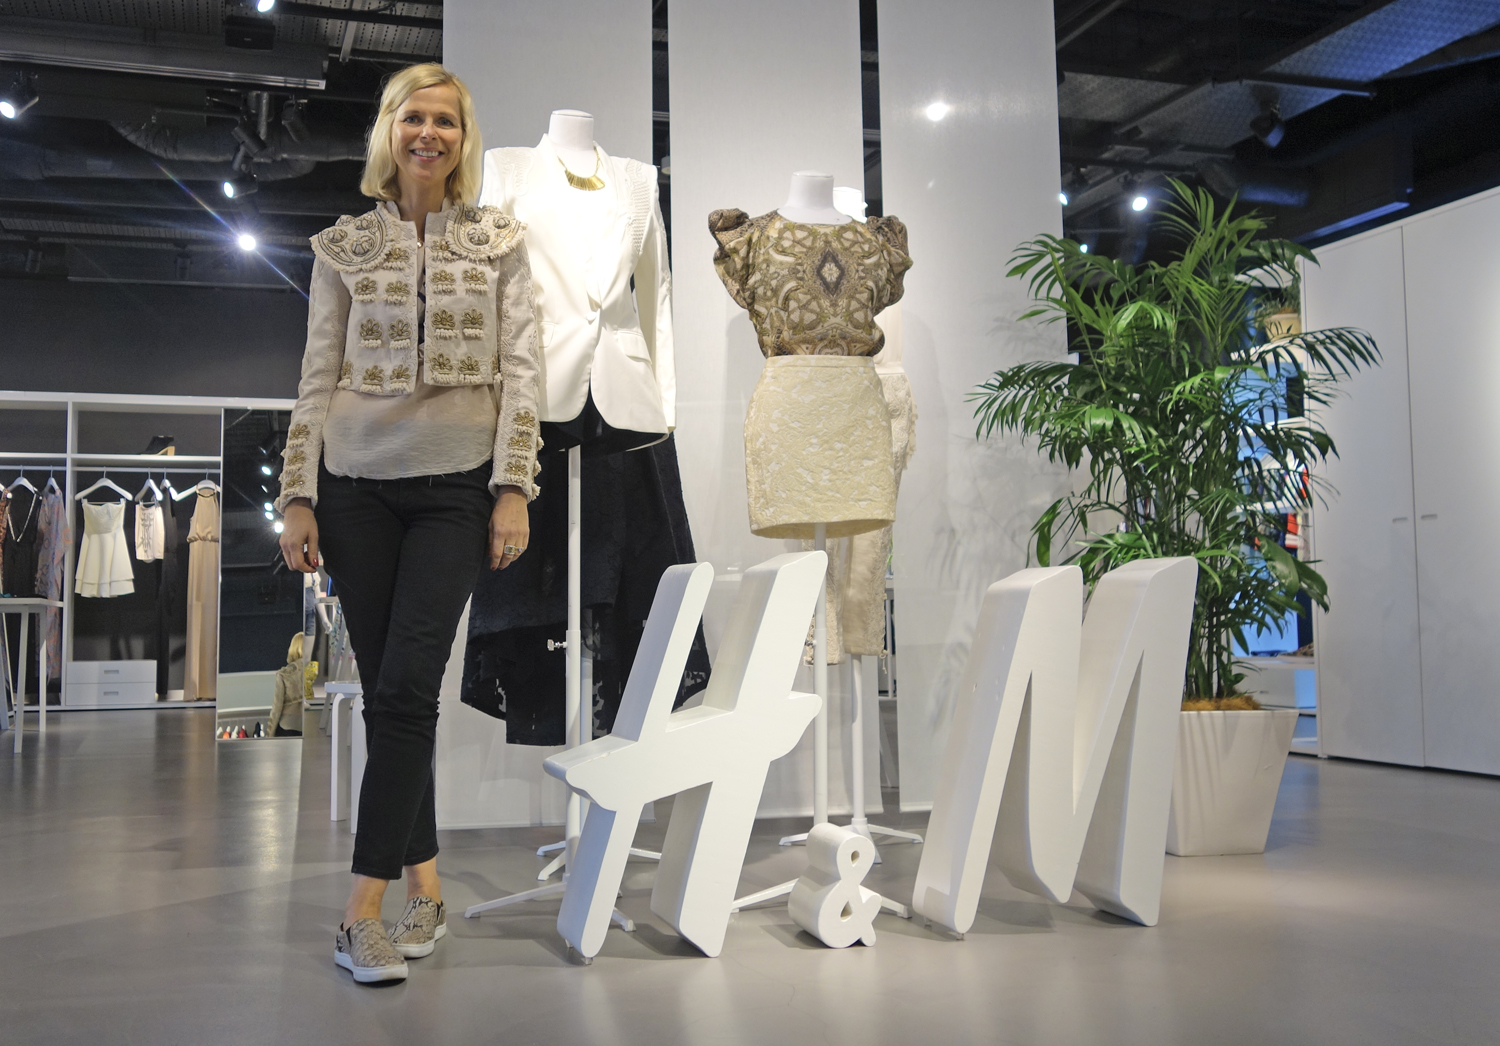 Catarina Midby, Head of Fashion and Sustainability Communications at H&M